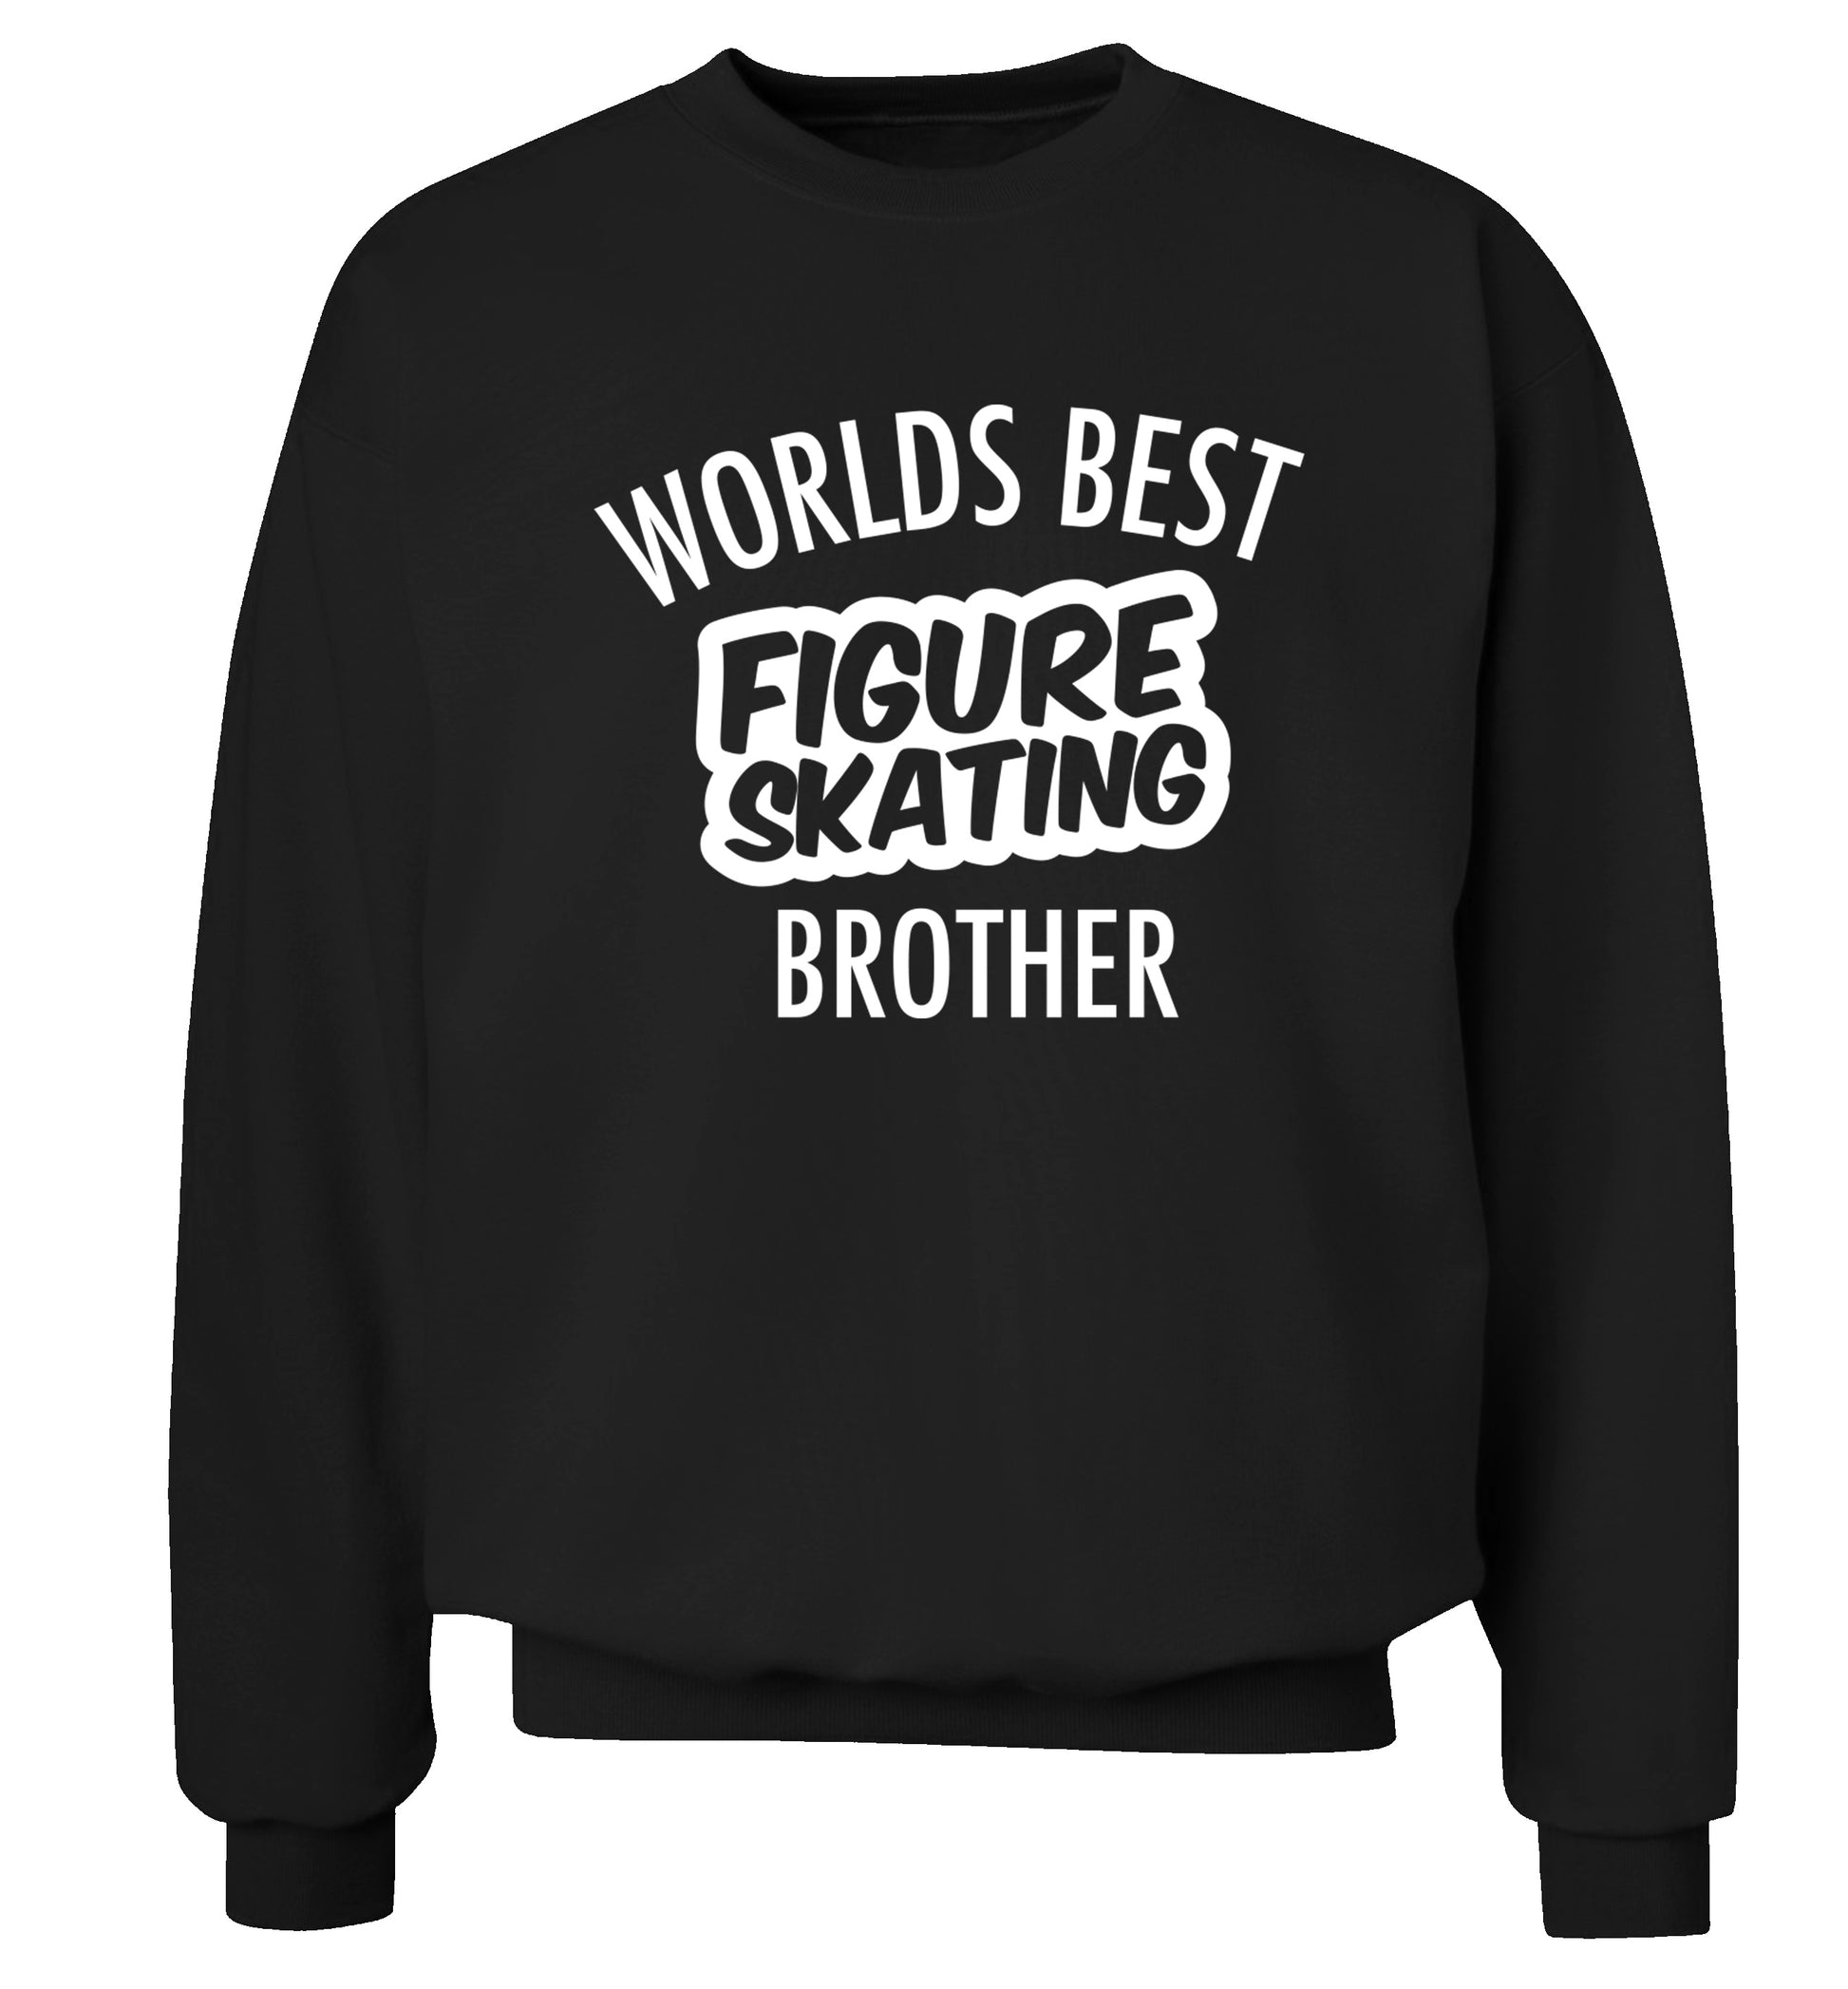 Worlds best figure skating brother Adult's unisexblack Sweater 2XL